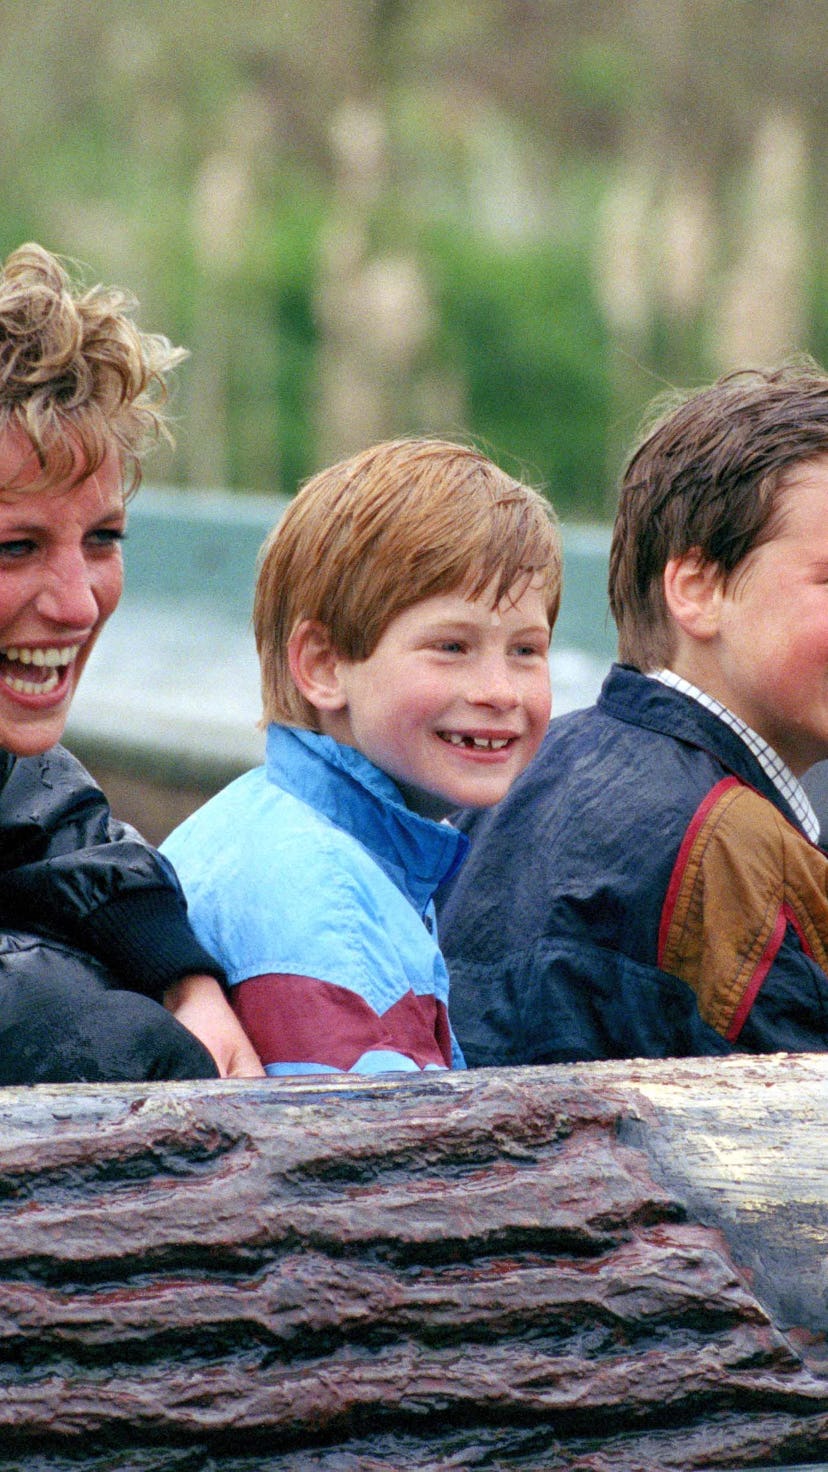 Picture From File:Diana Princess Of Wales, Prince William & Prince Harry Visit The 'Thorpe Park' Amu...